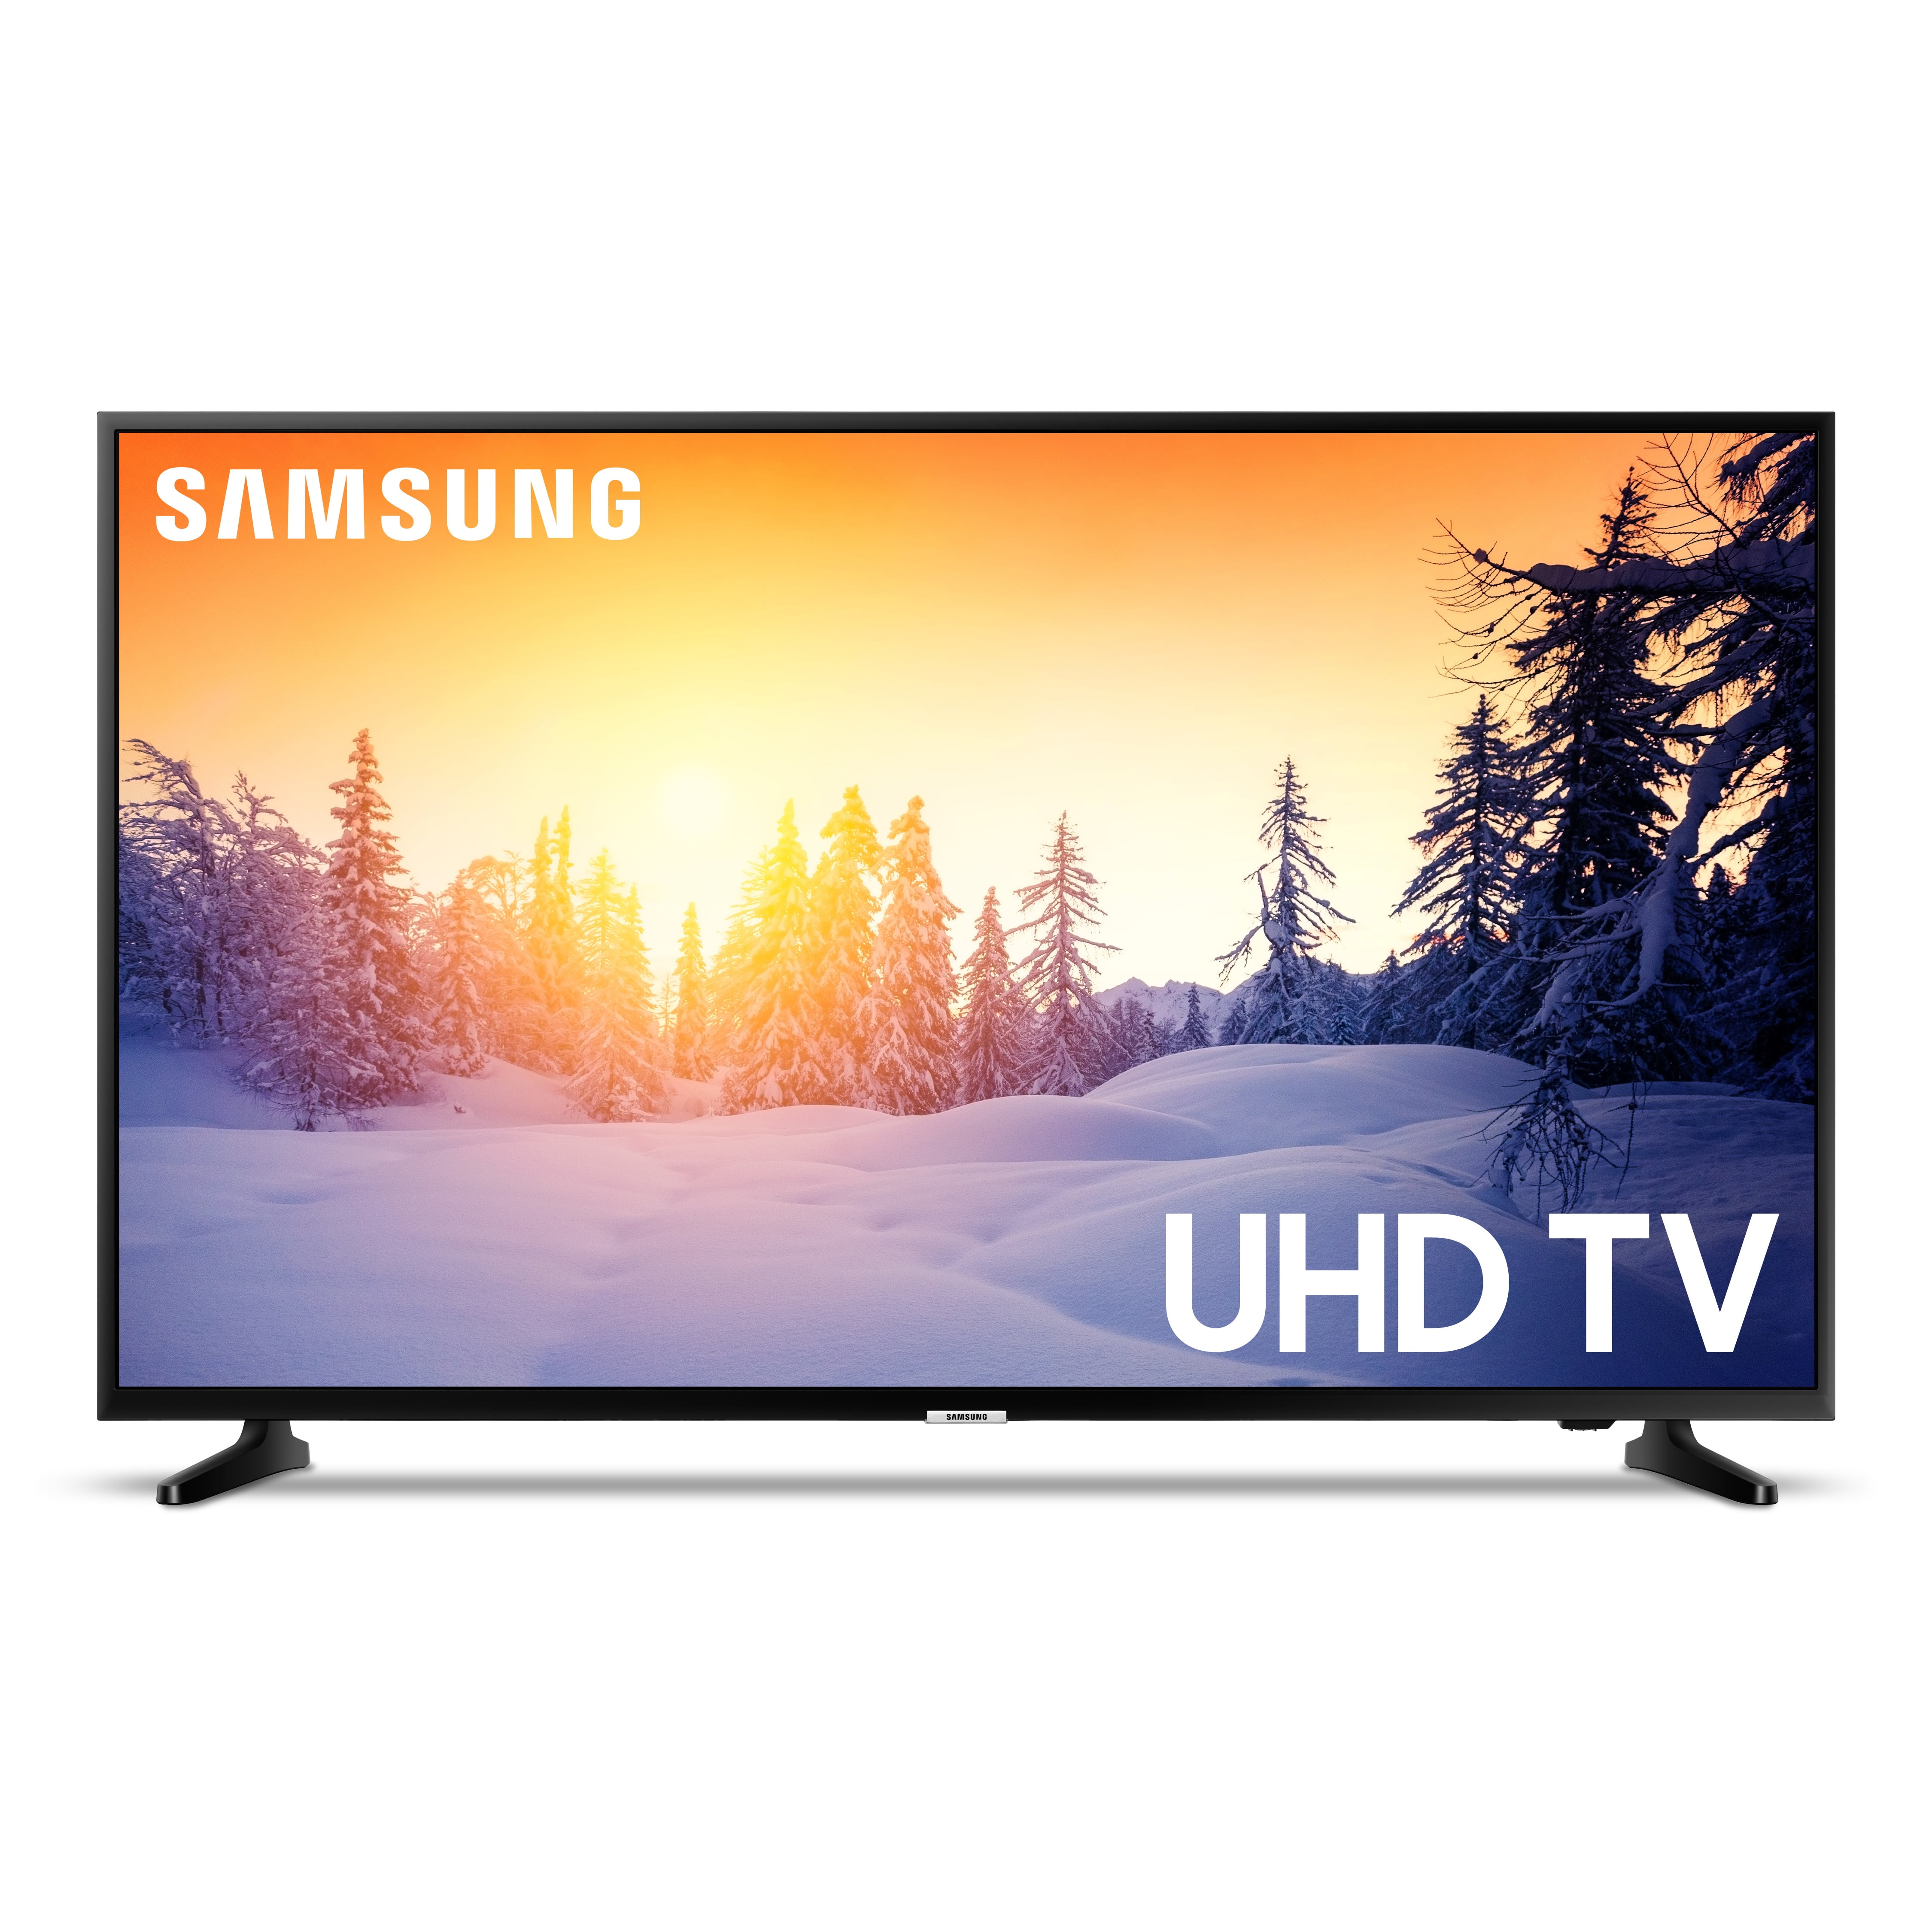 SAMSUNG 65 Class 4K UHD 2160p LED Smart TV with HDR UN65NU6900